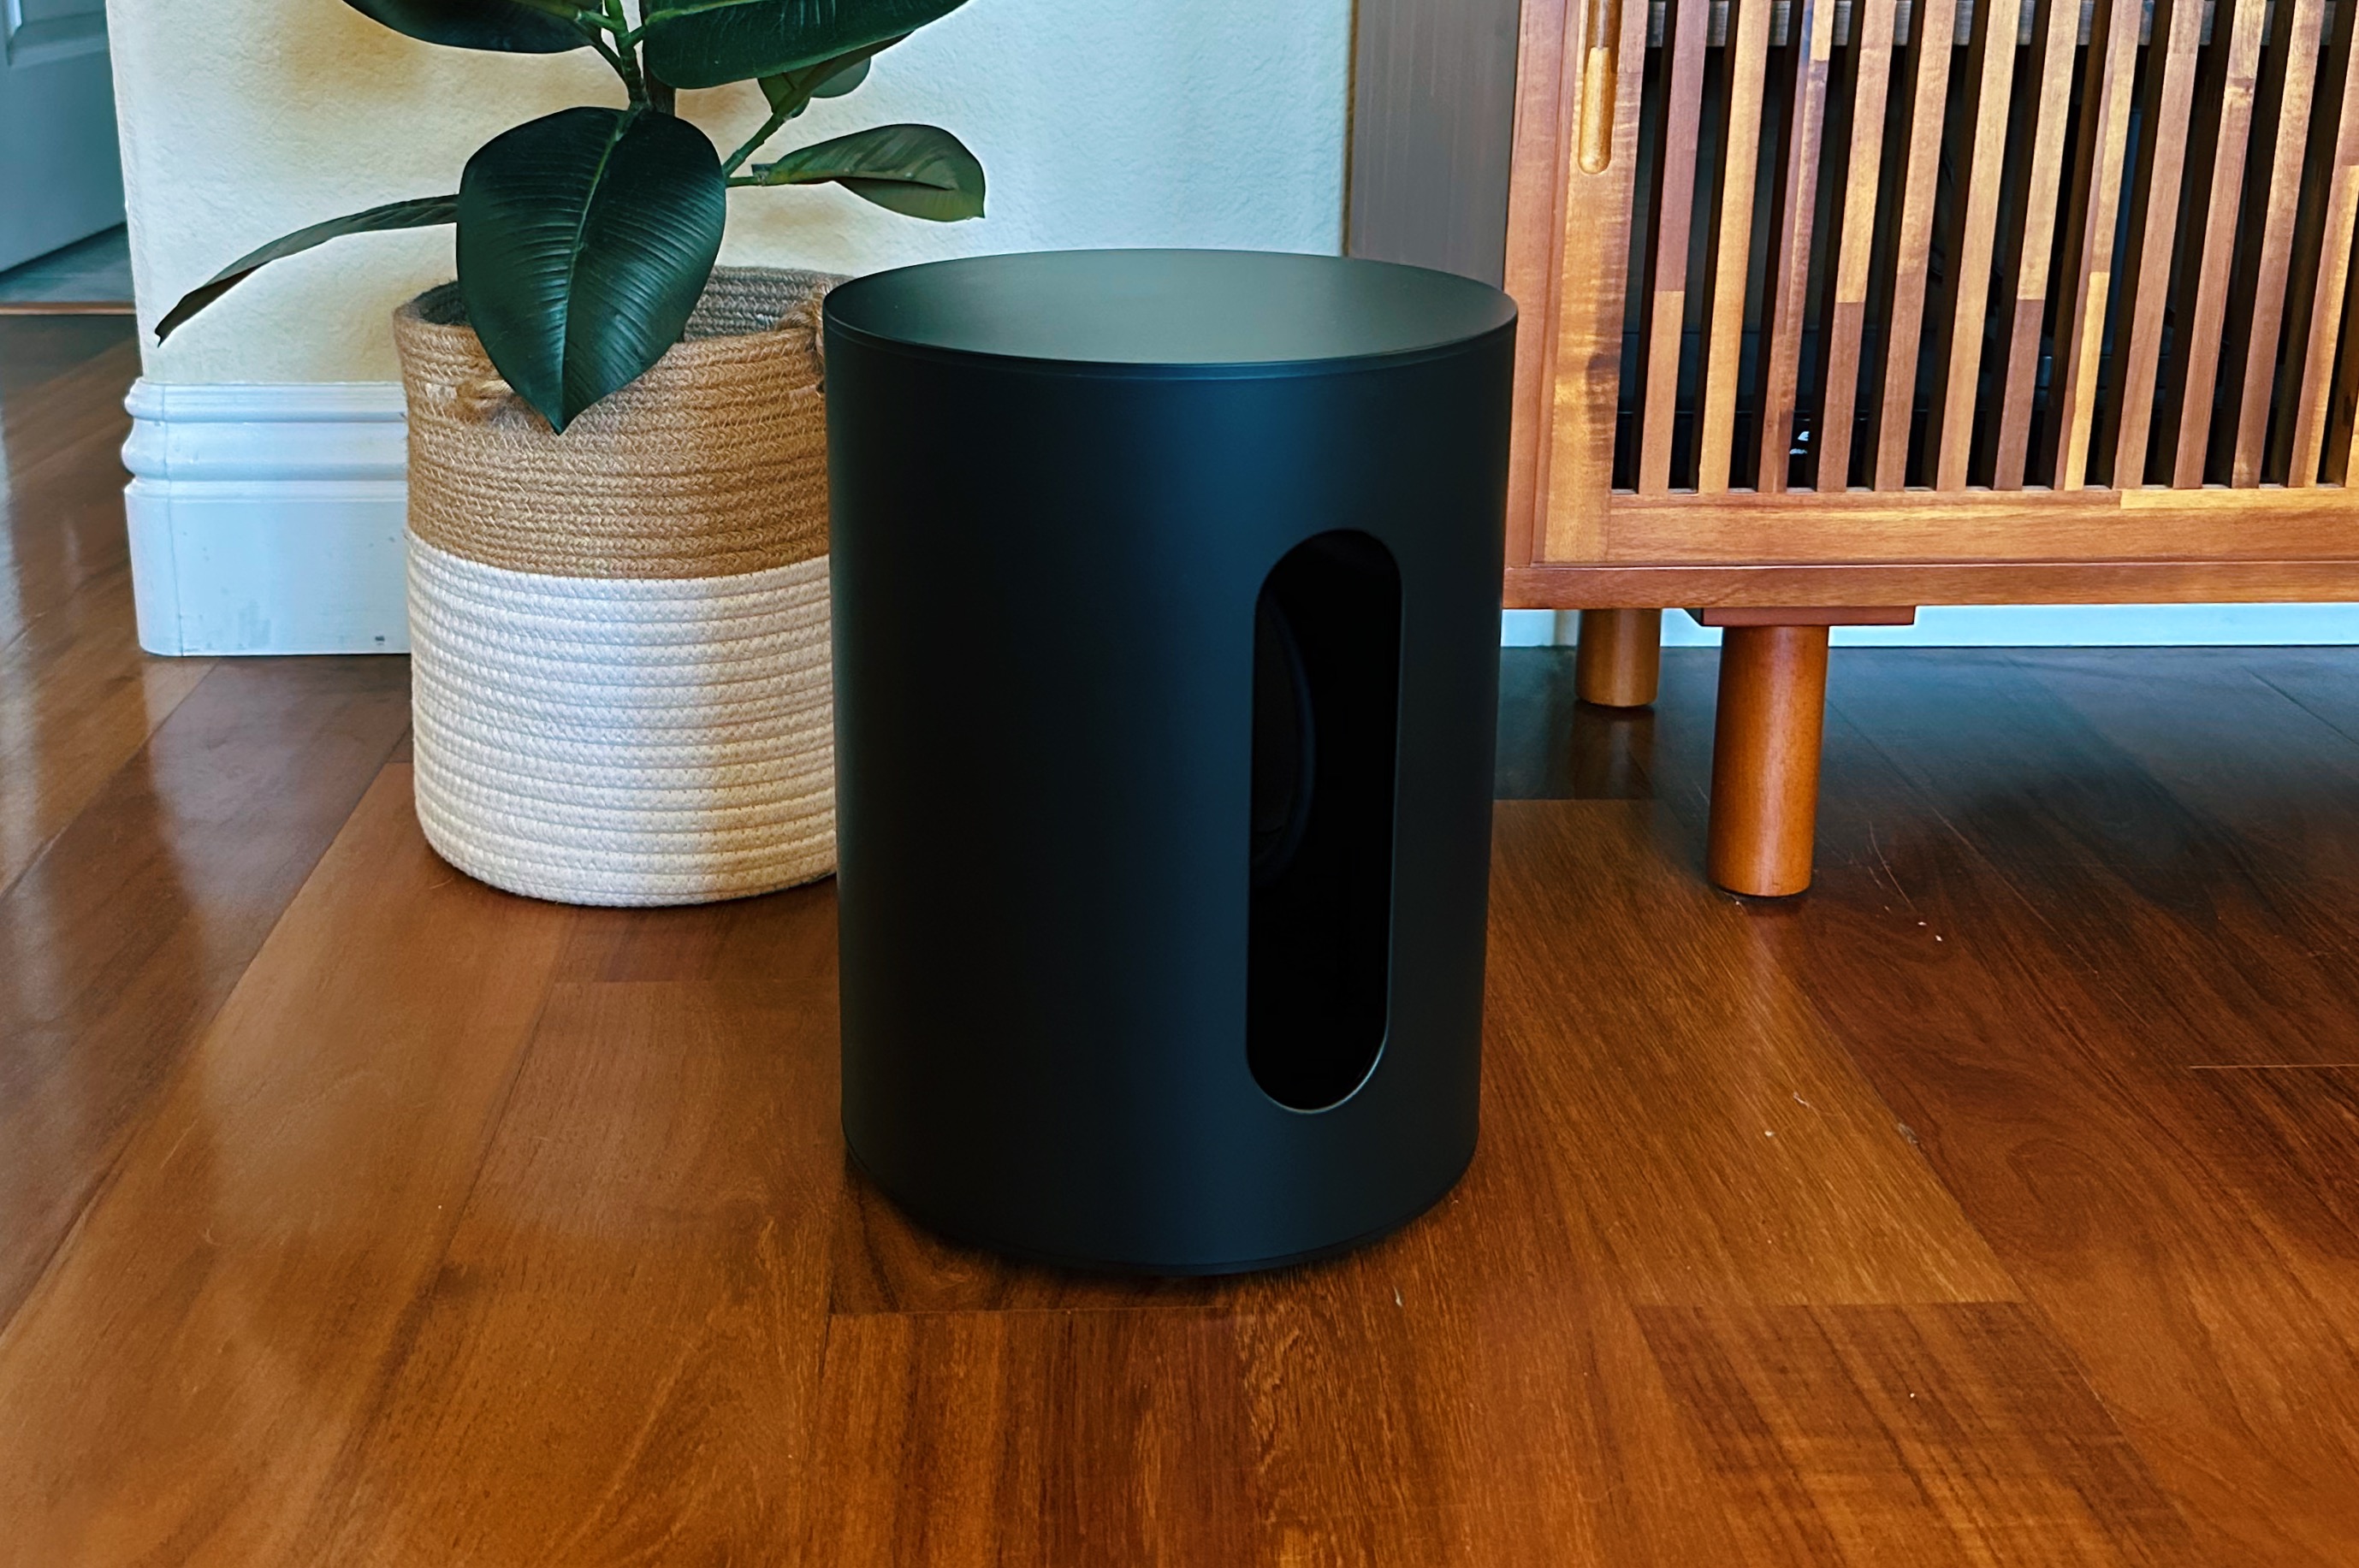 Sonos Sub Mini Review: A Cheaper Subwoofer for Its Other Wireless Speakers